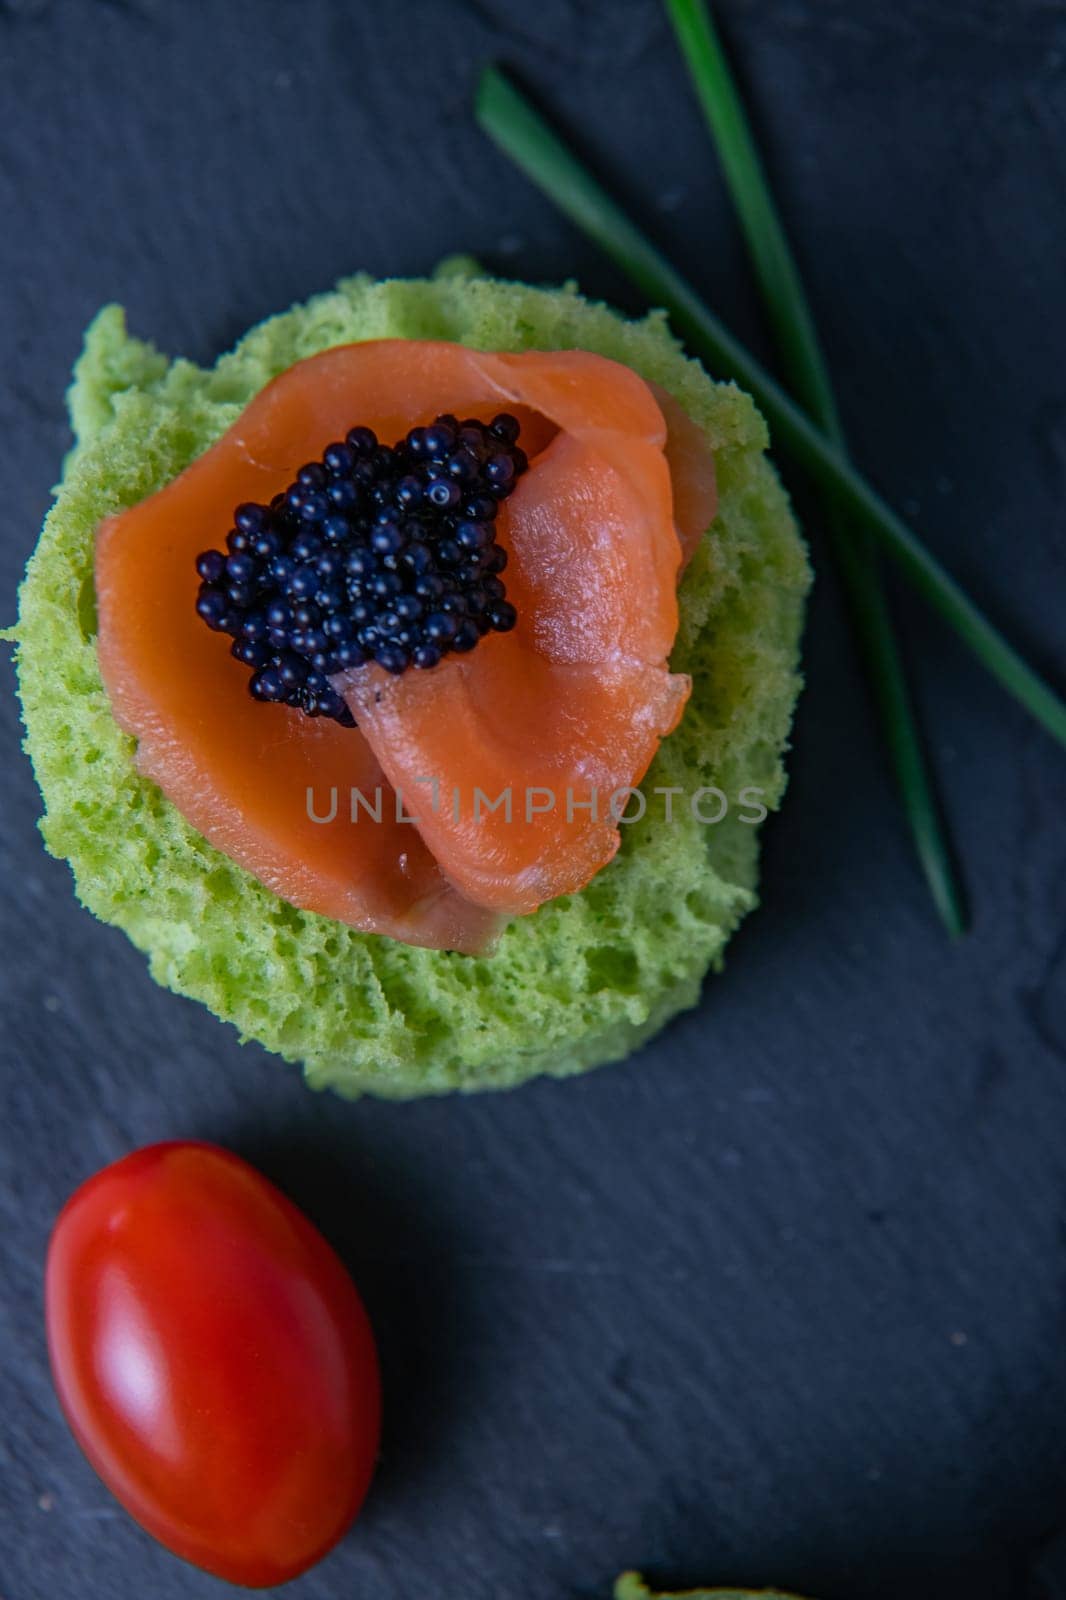 Recipe of Spinach pie, Delicious sponge cake with spinach, High quality photo